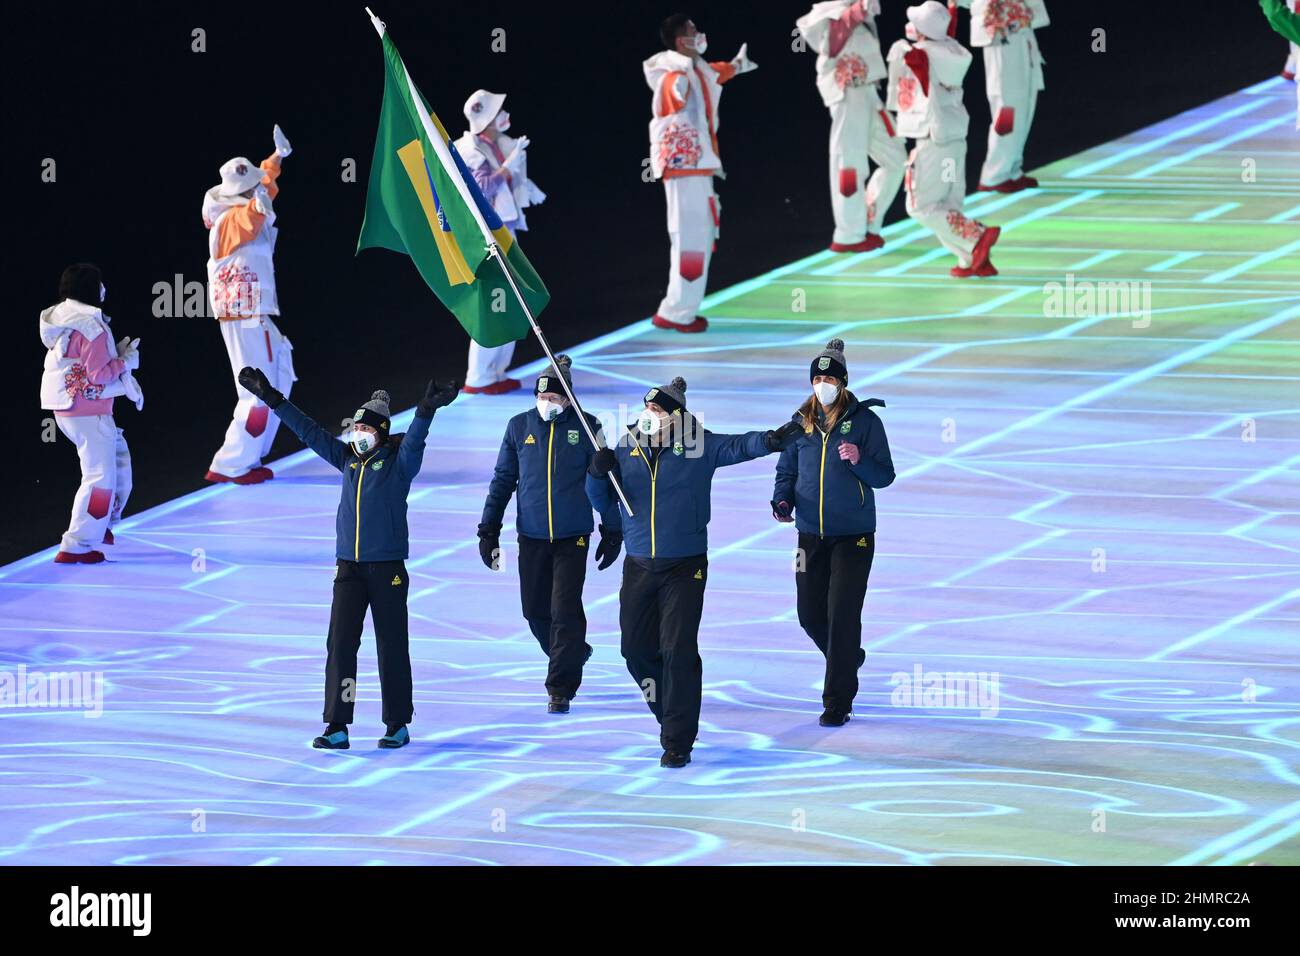 (220212) -- ZHANGJIAKOU, Feb. 12, 2022 (Xinhua) -- File photo shows Jaqueline Mourao (1st L, front) of Brazil during the opening ceremony of Beijing 2022 Winter Olympics in Beijing, capital of China, Feb. 4, 2022. Setting foot again in Beijing where she competed in mountain biking in 2008, Jaqueline Mourao created history as the first Brazilian athlete to compete at the Olympic Games eight times since her Olympic debut at Athens 2004, and she's also the first Brazilian woman athlete competed at both summer and winter Olympics.'In 2008, I wasn't a very mature athlete, mentally,' Mourao said. 'T Stock Photo